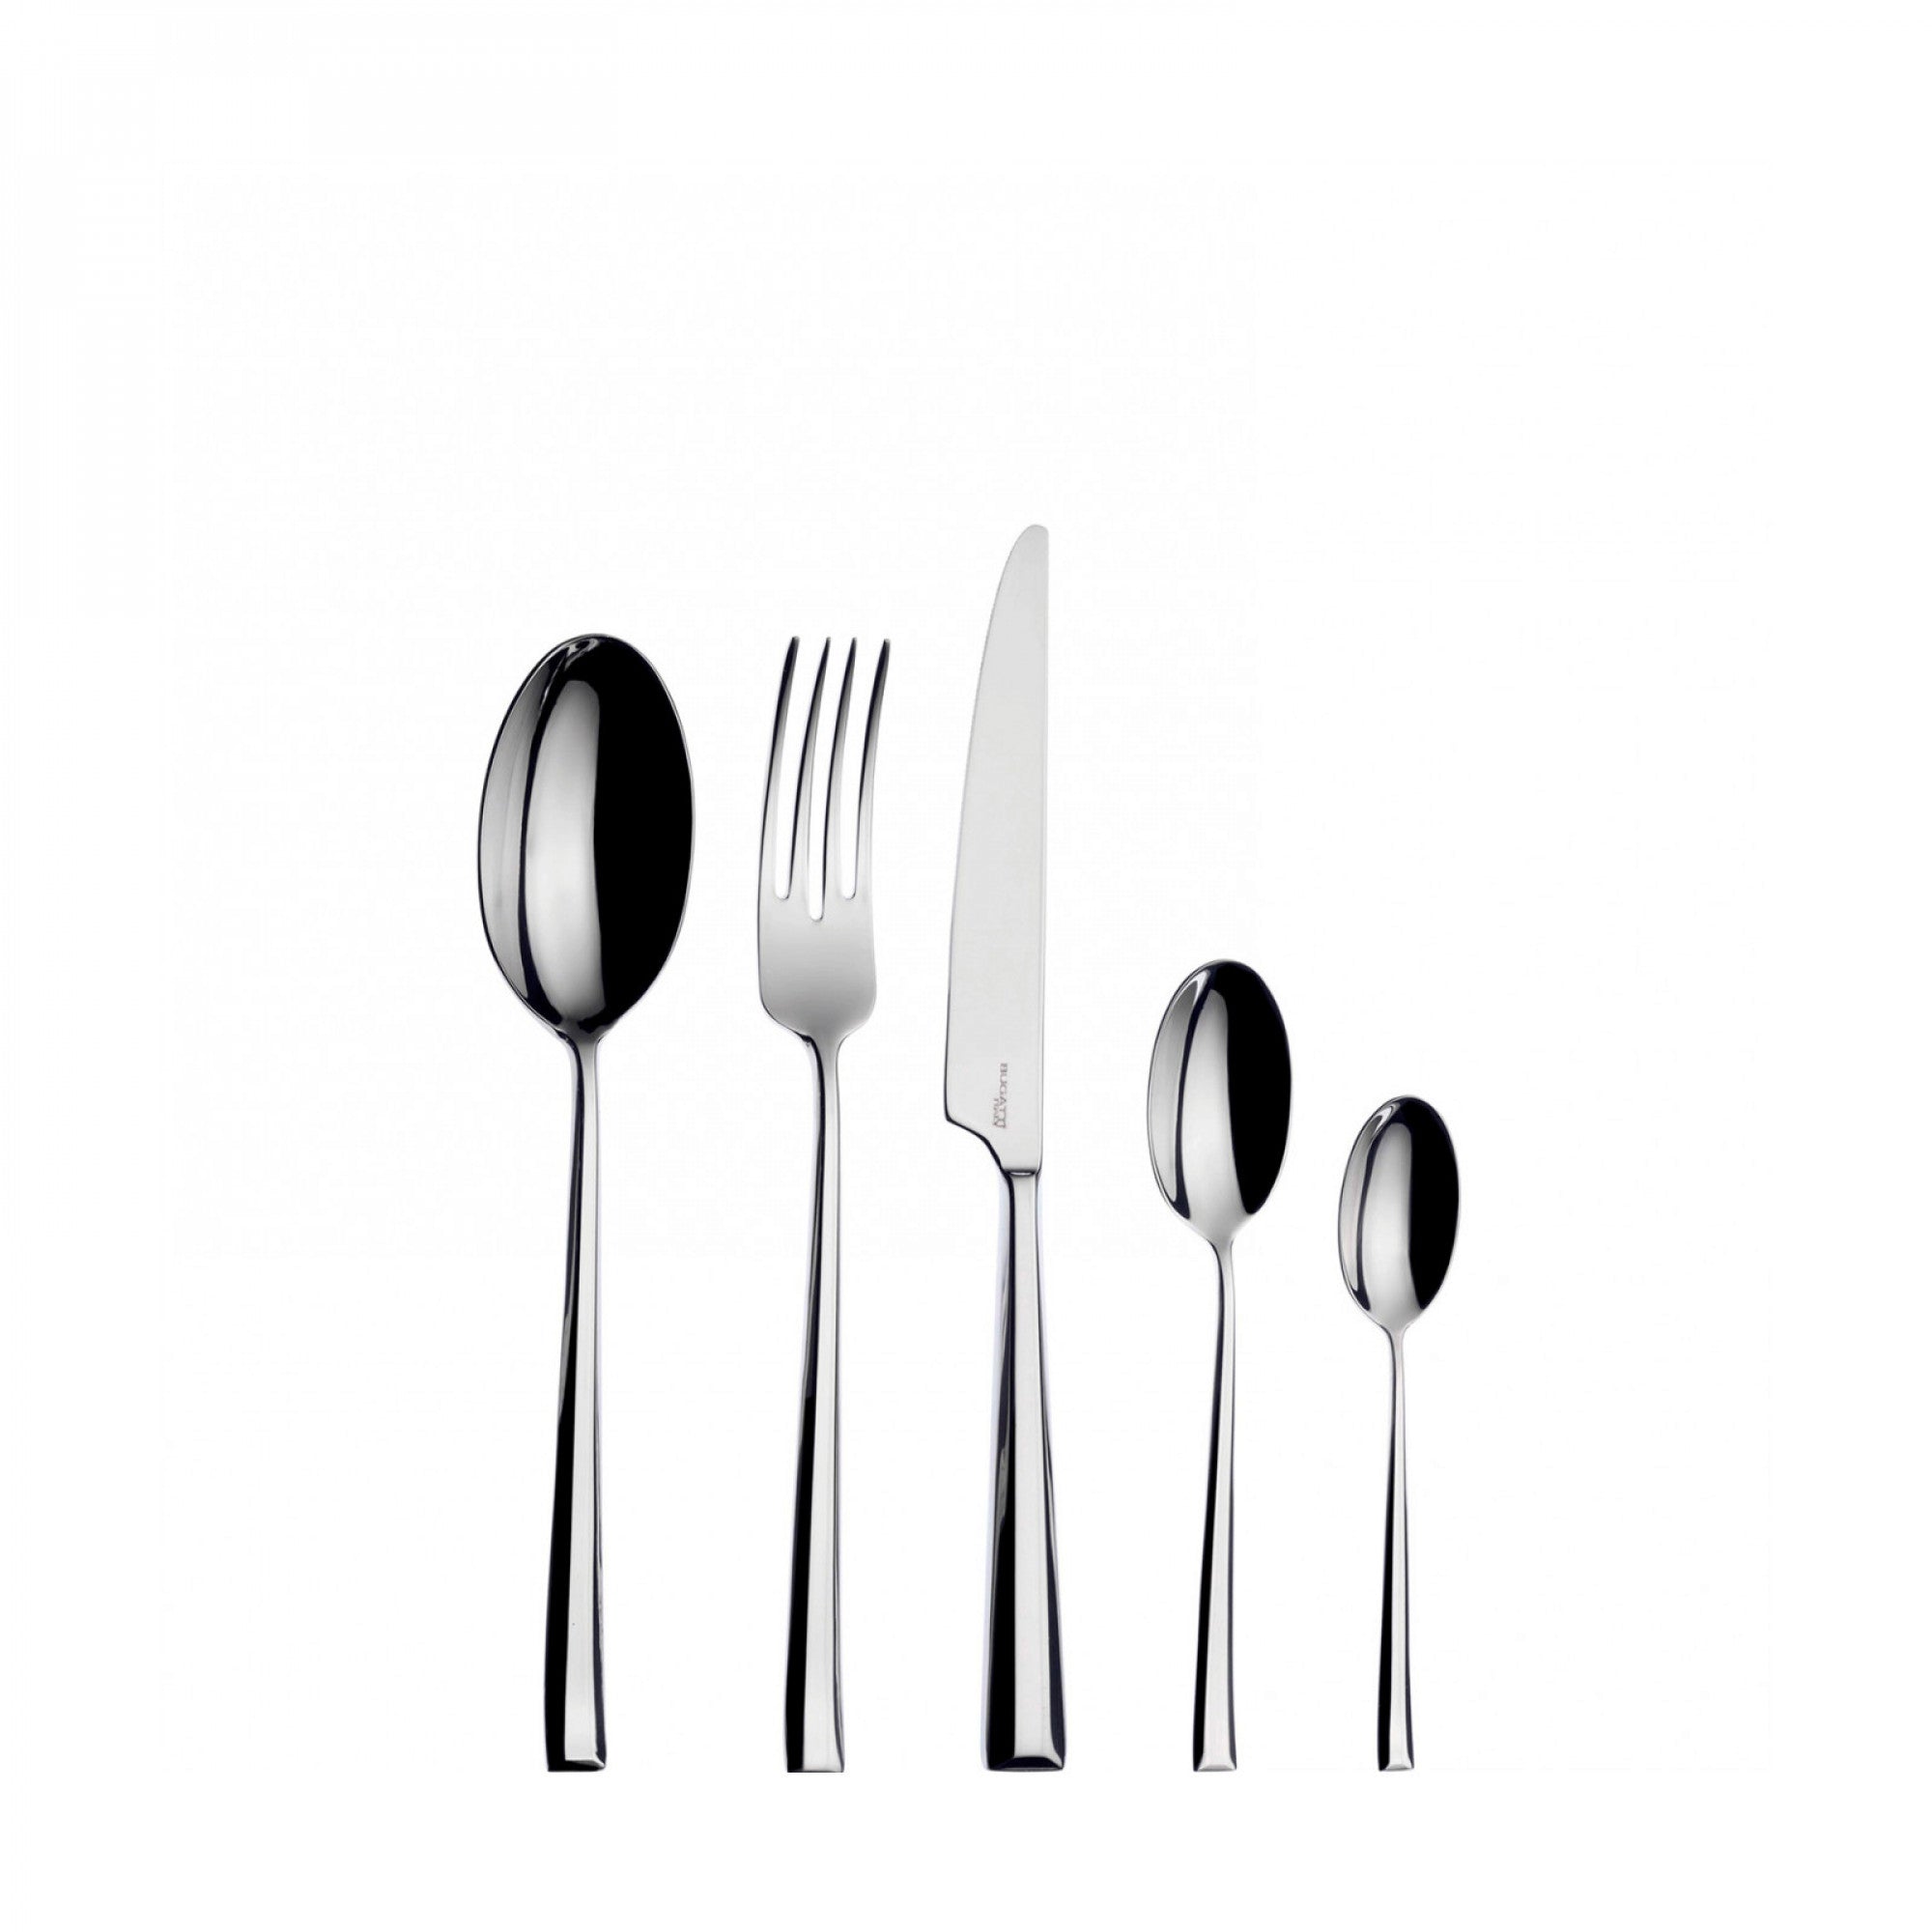 BUGATTI, Duetto, 30-piece cutlery set in 18/10 stainless steel